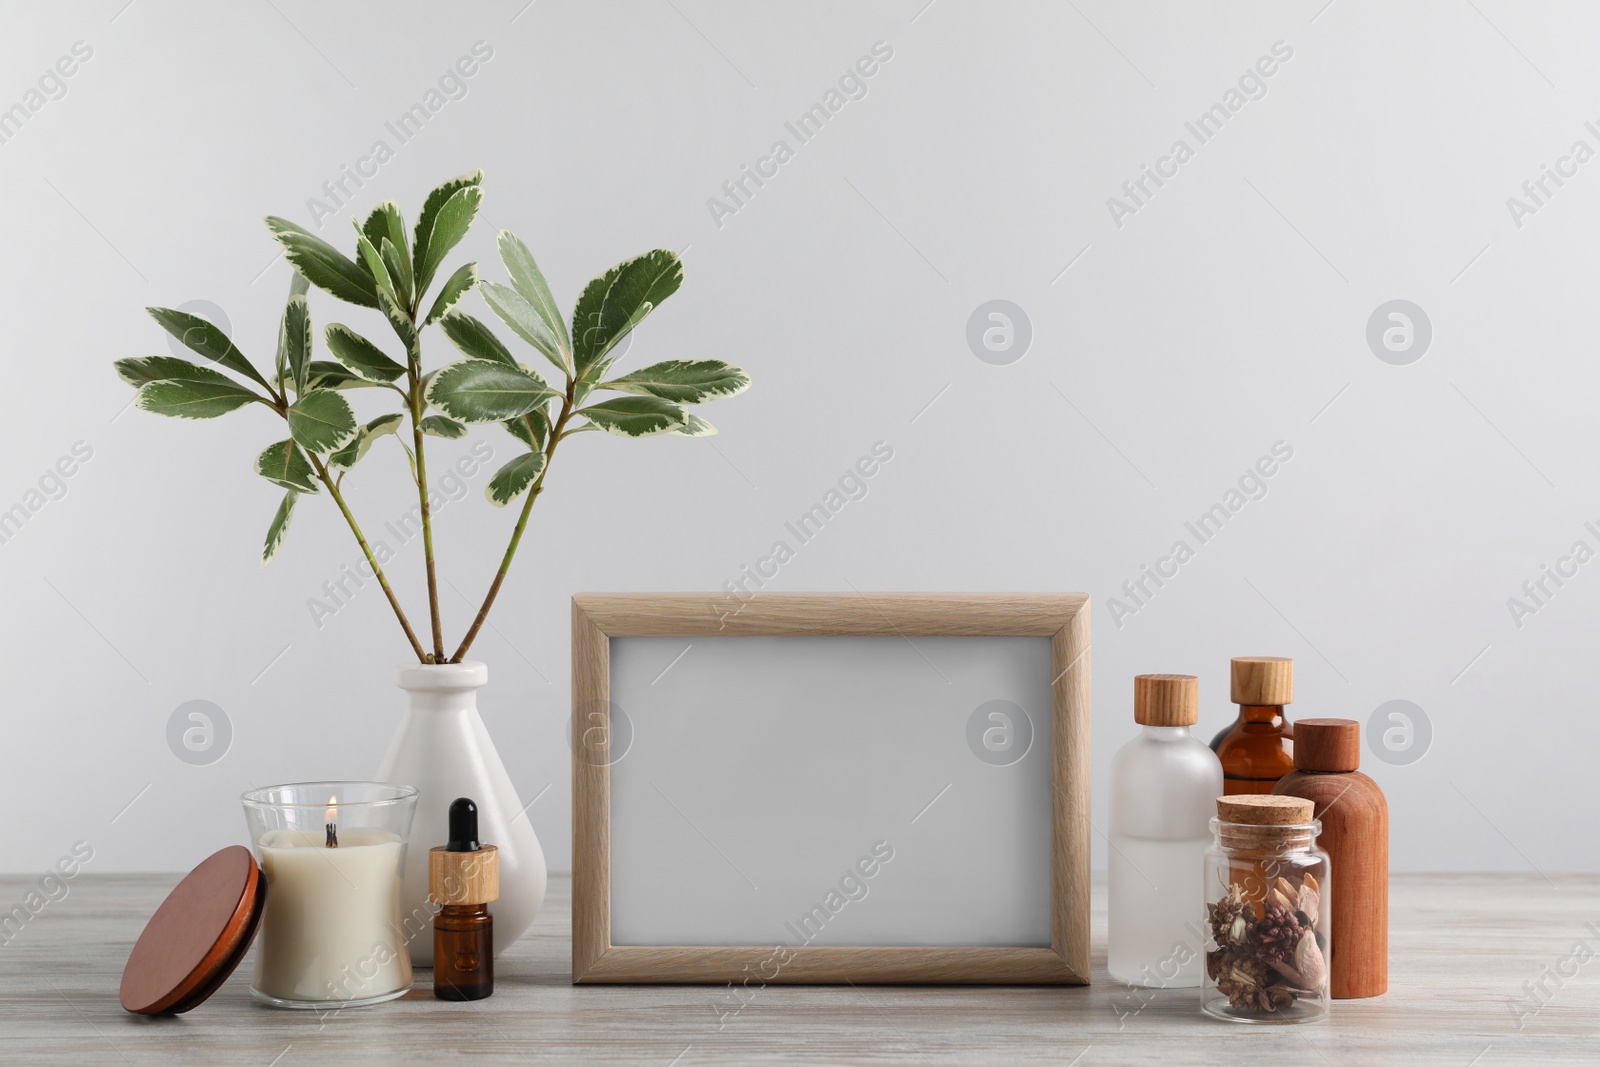 Photo of Blank photo frame, different bottles and decor elements on wooden table